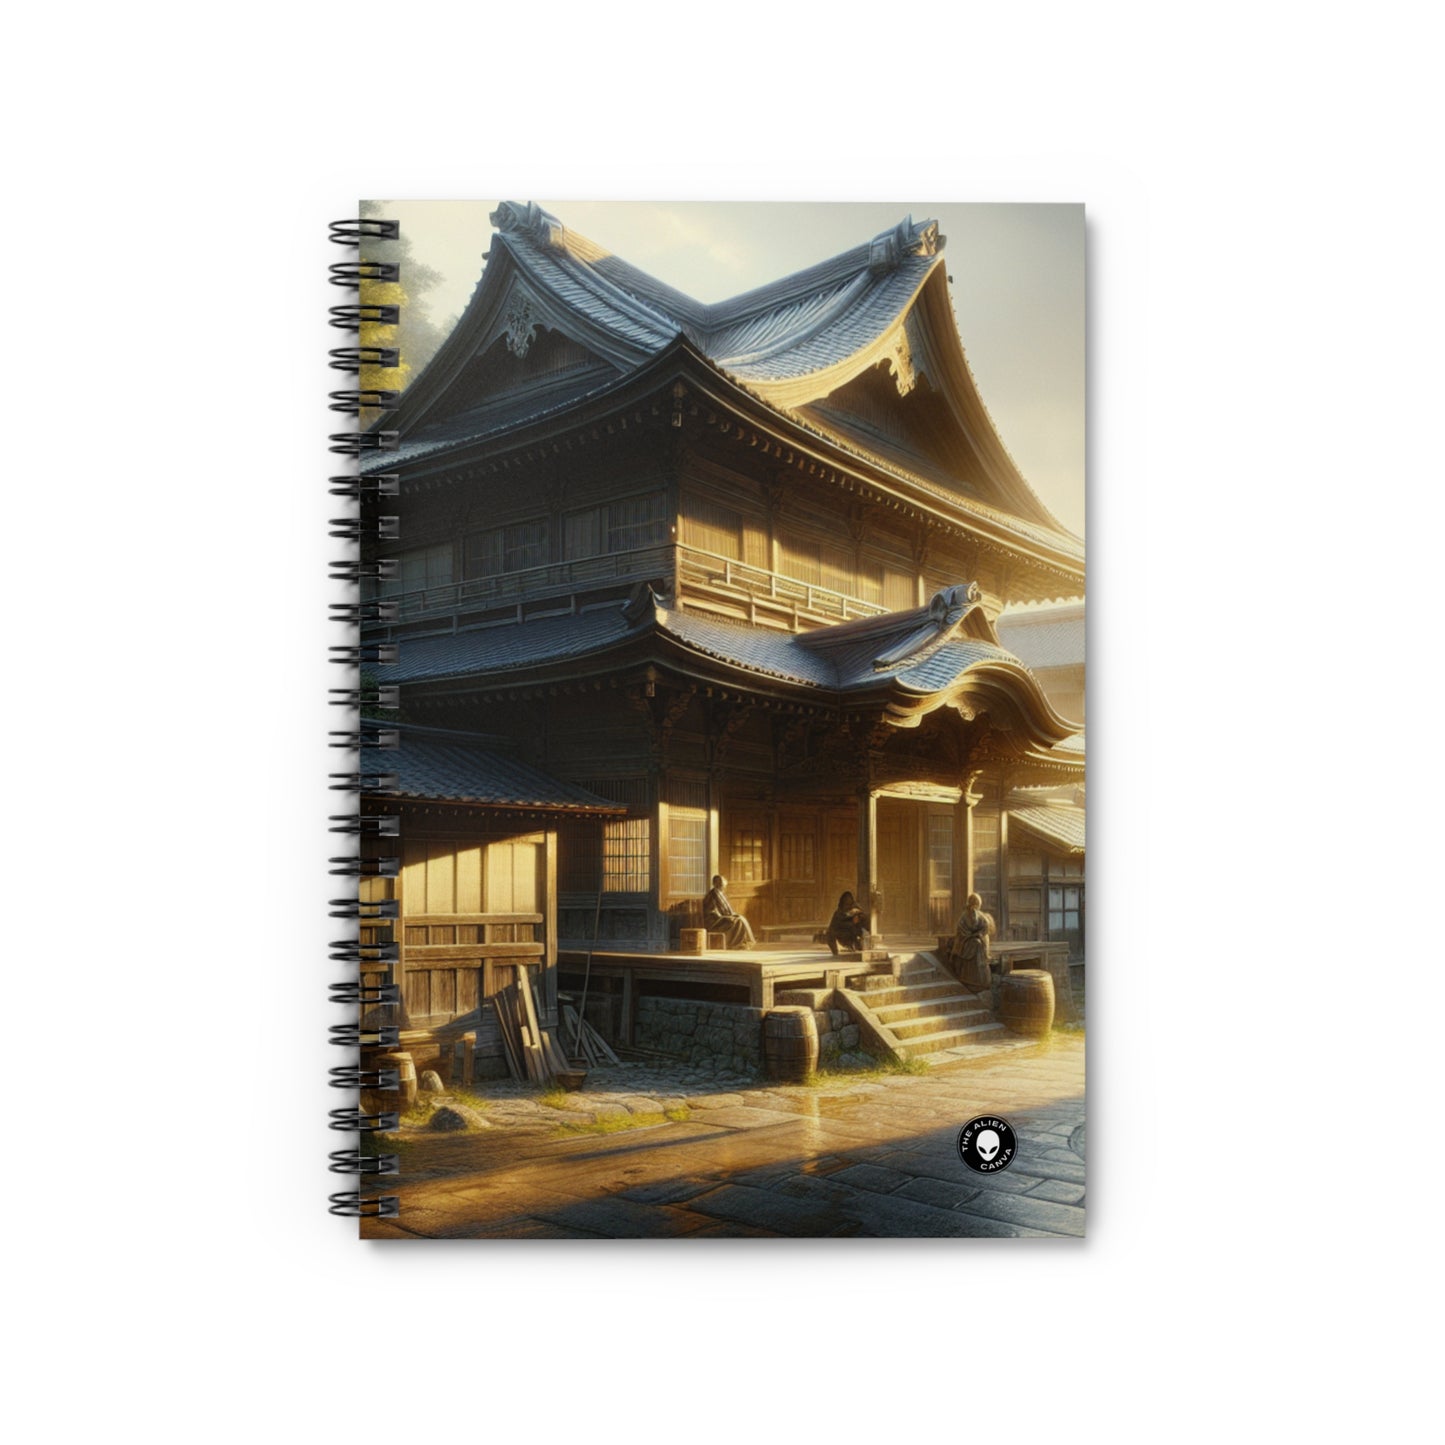 "Golden Hour Bliss: Photographic Realism Landscape" - The Alien Spiral Notebook (Ruled Line) Photographic Realism